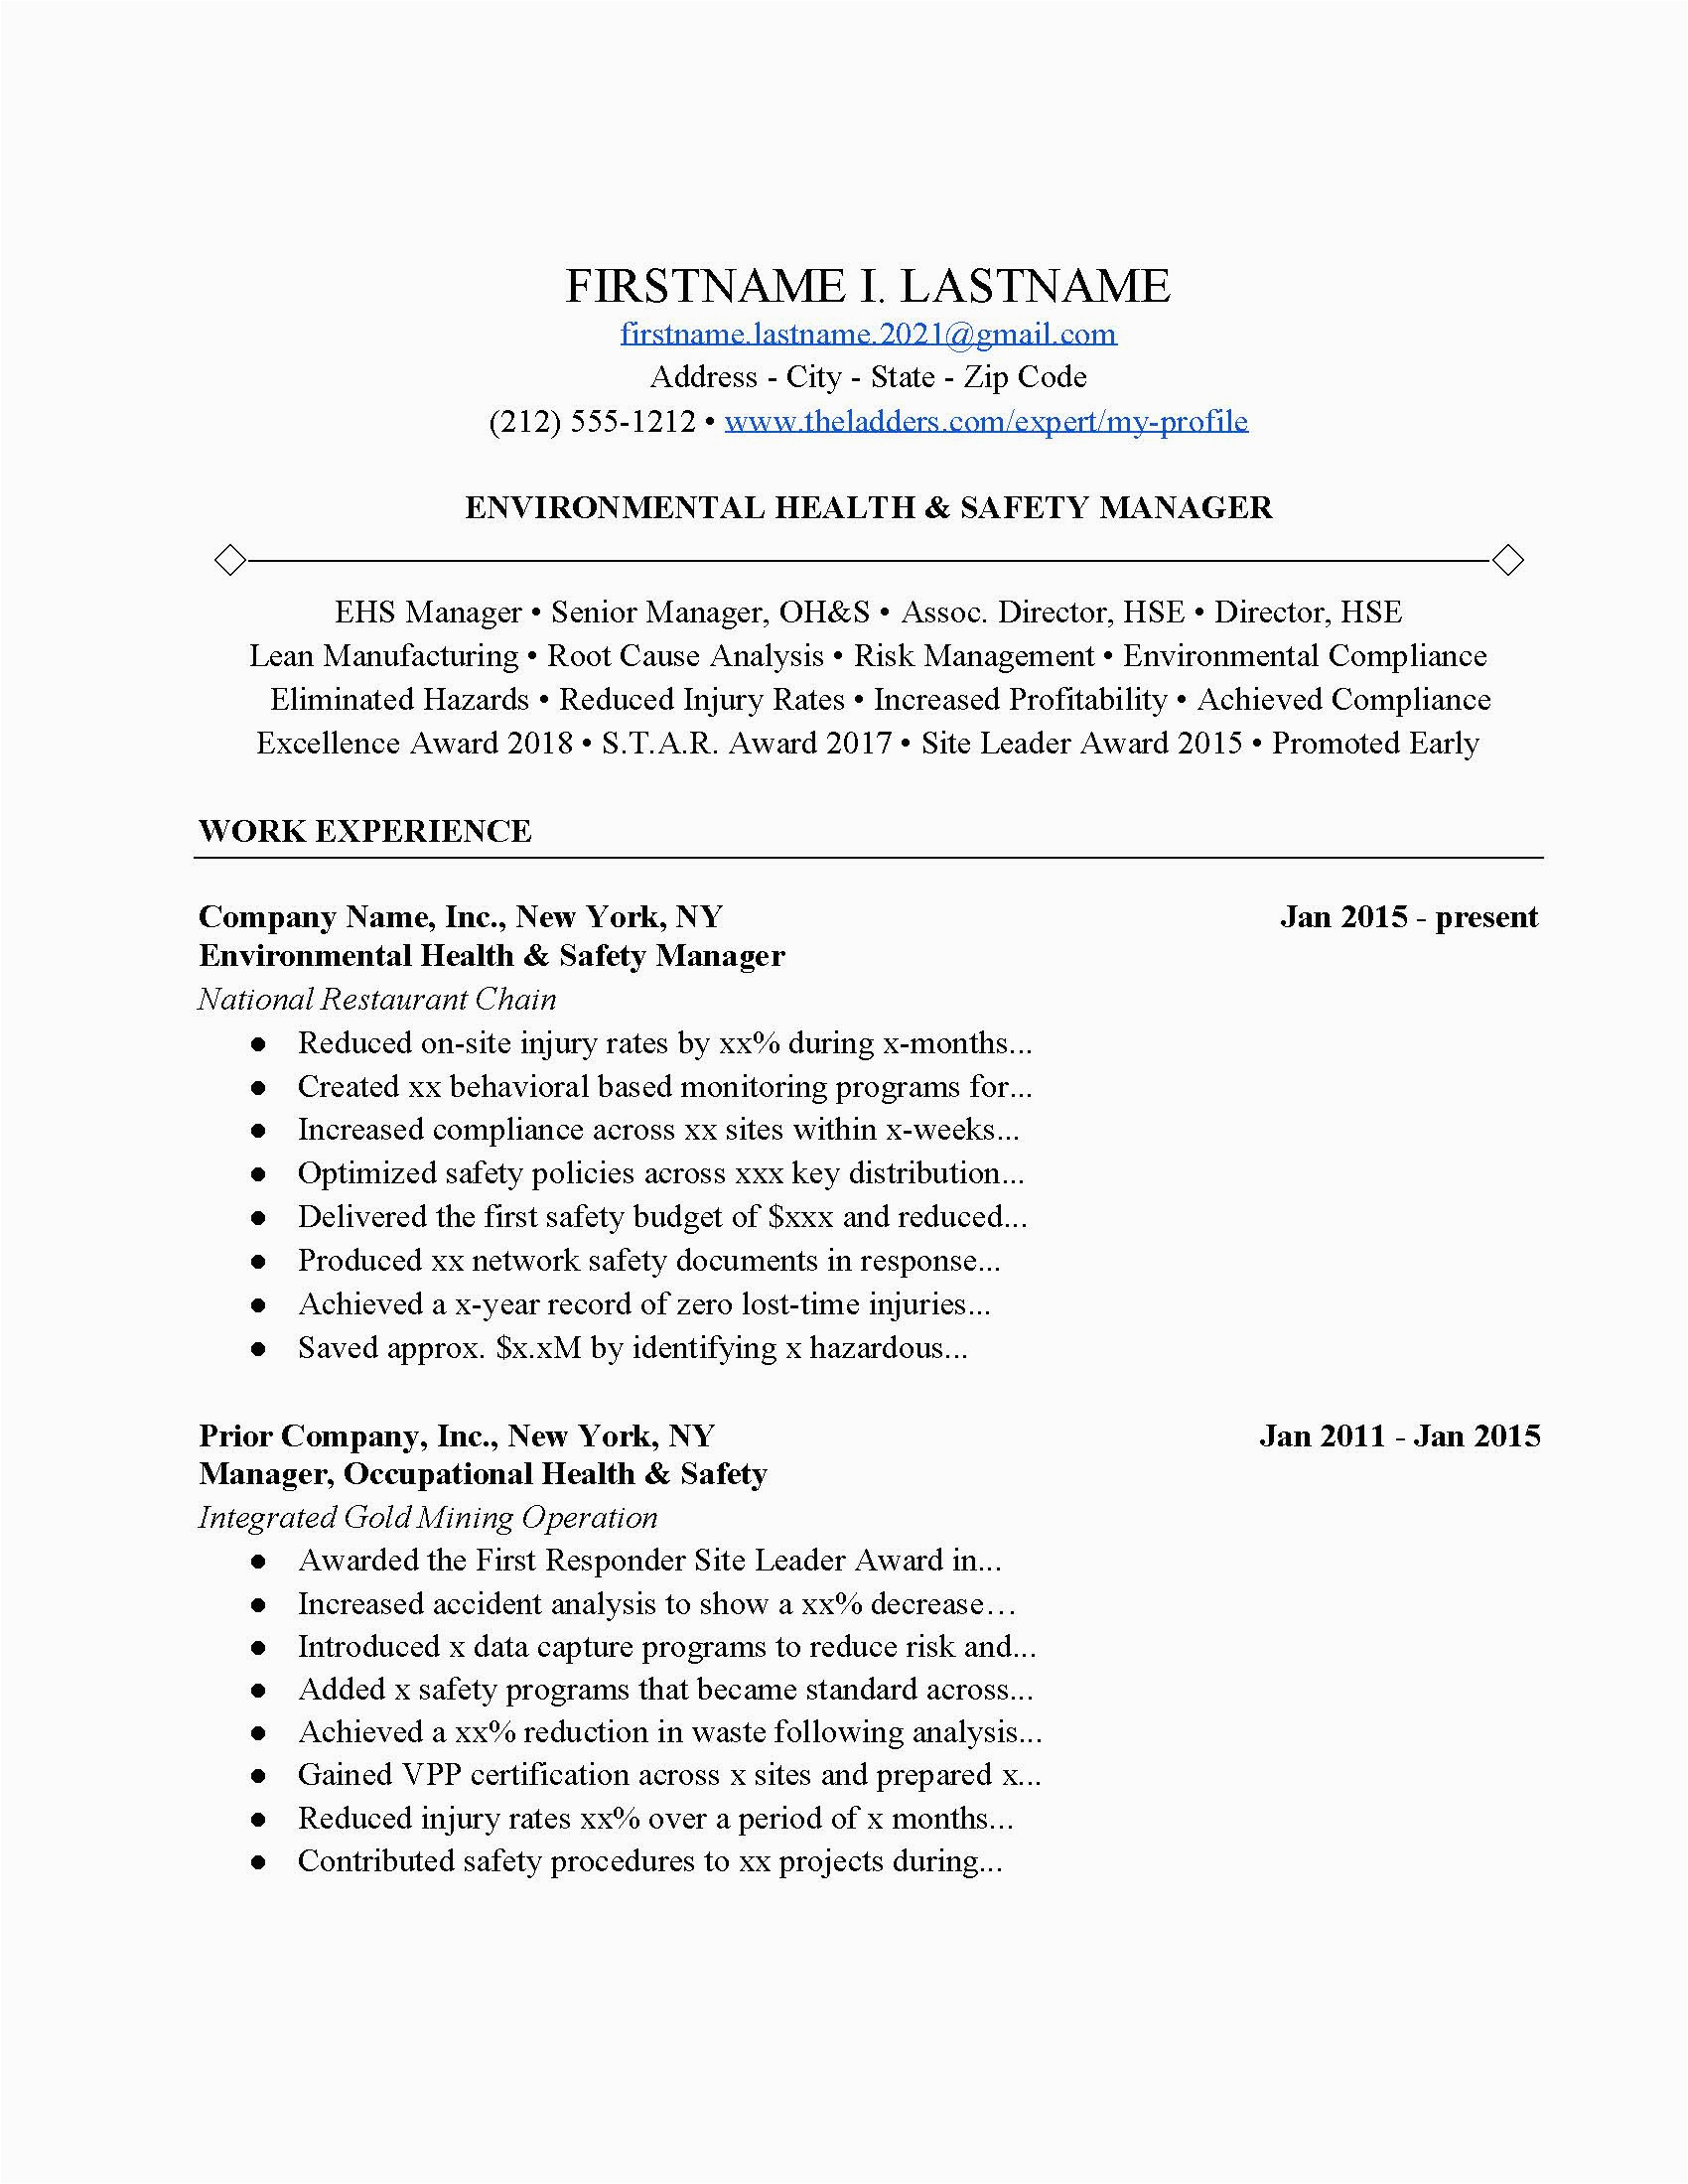 Sample Resume for Environmental Health and Safety Environmental Health and Safety Manager Resume Example Free